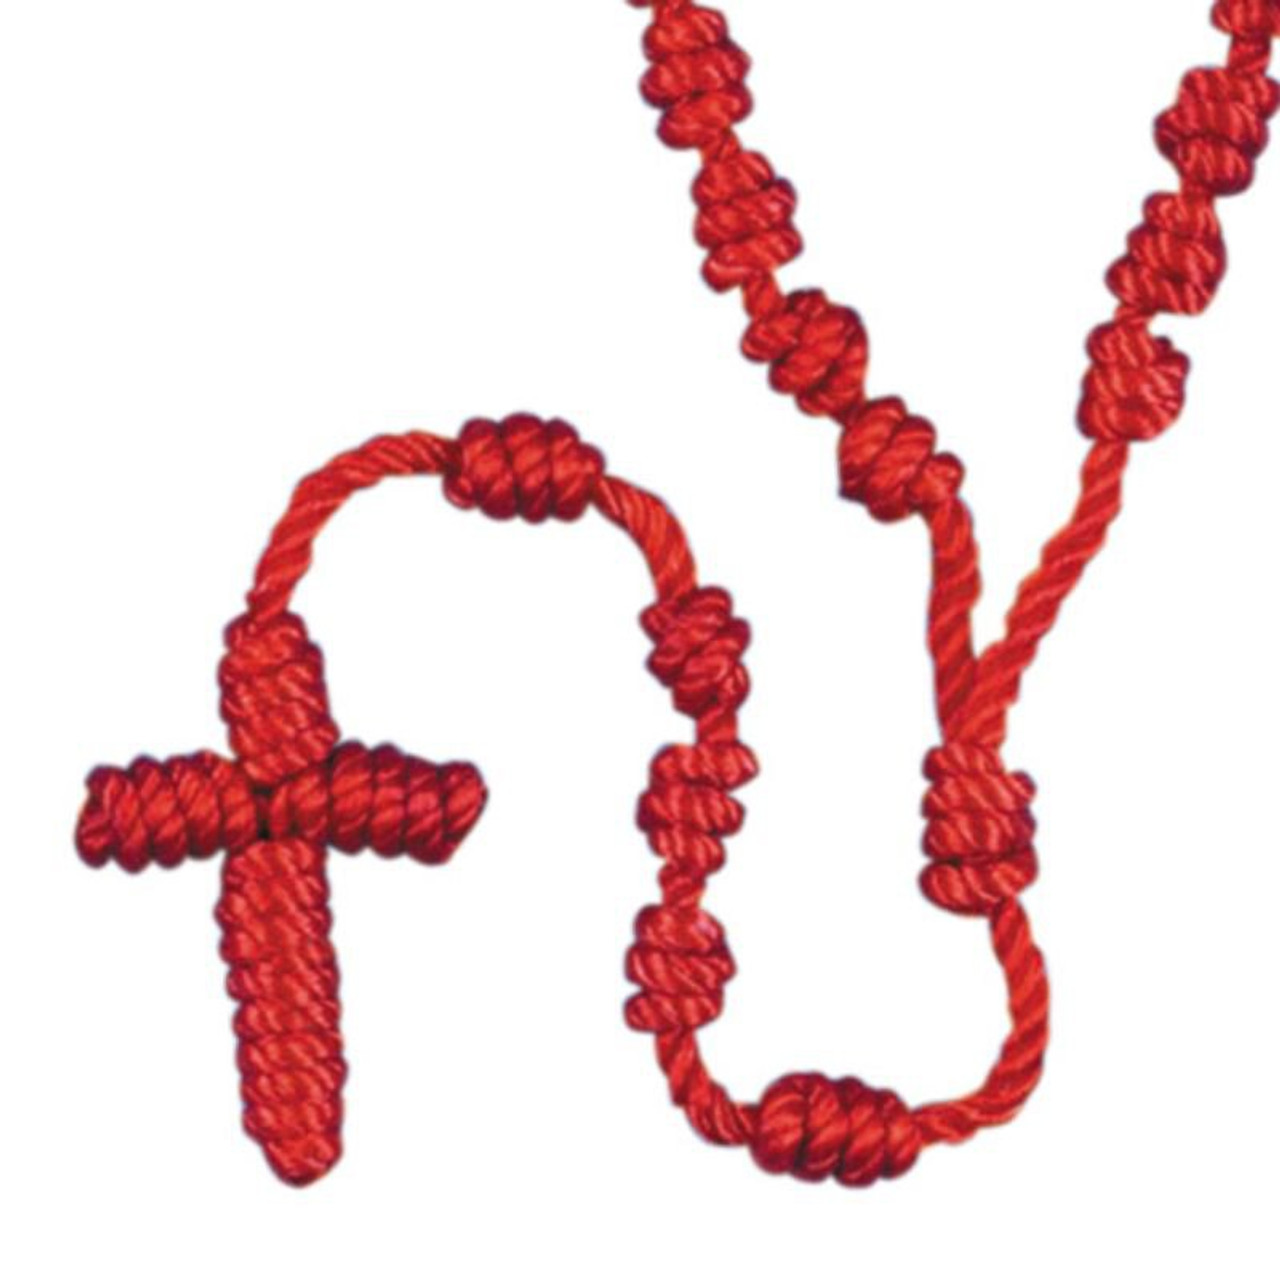 Buy Multi Colored Knotted Cord Rosary Kits